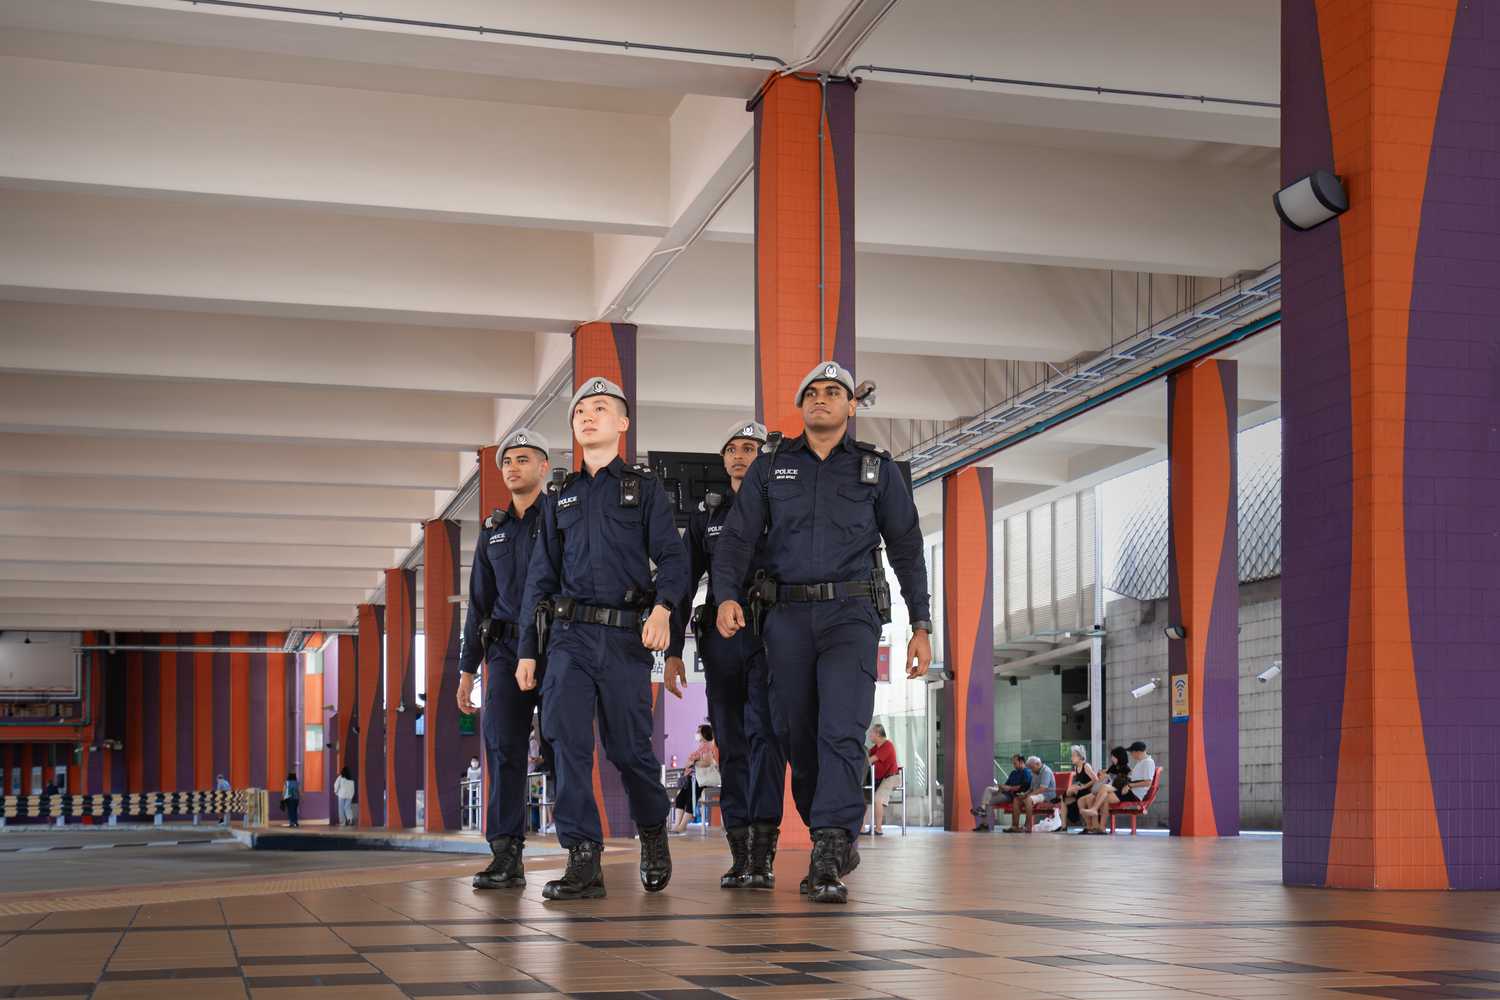 four officers walking together to the 7pm direction, at a bus interchange. The interchange is visibly orange painted with high ceilings and human traffic around